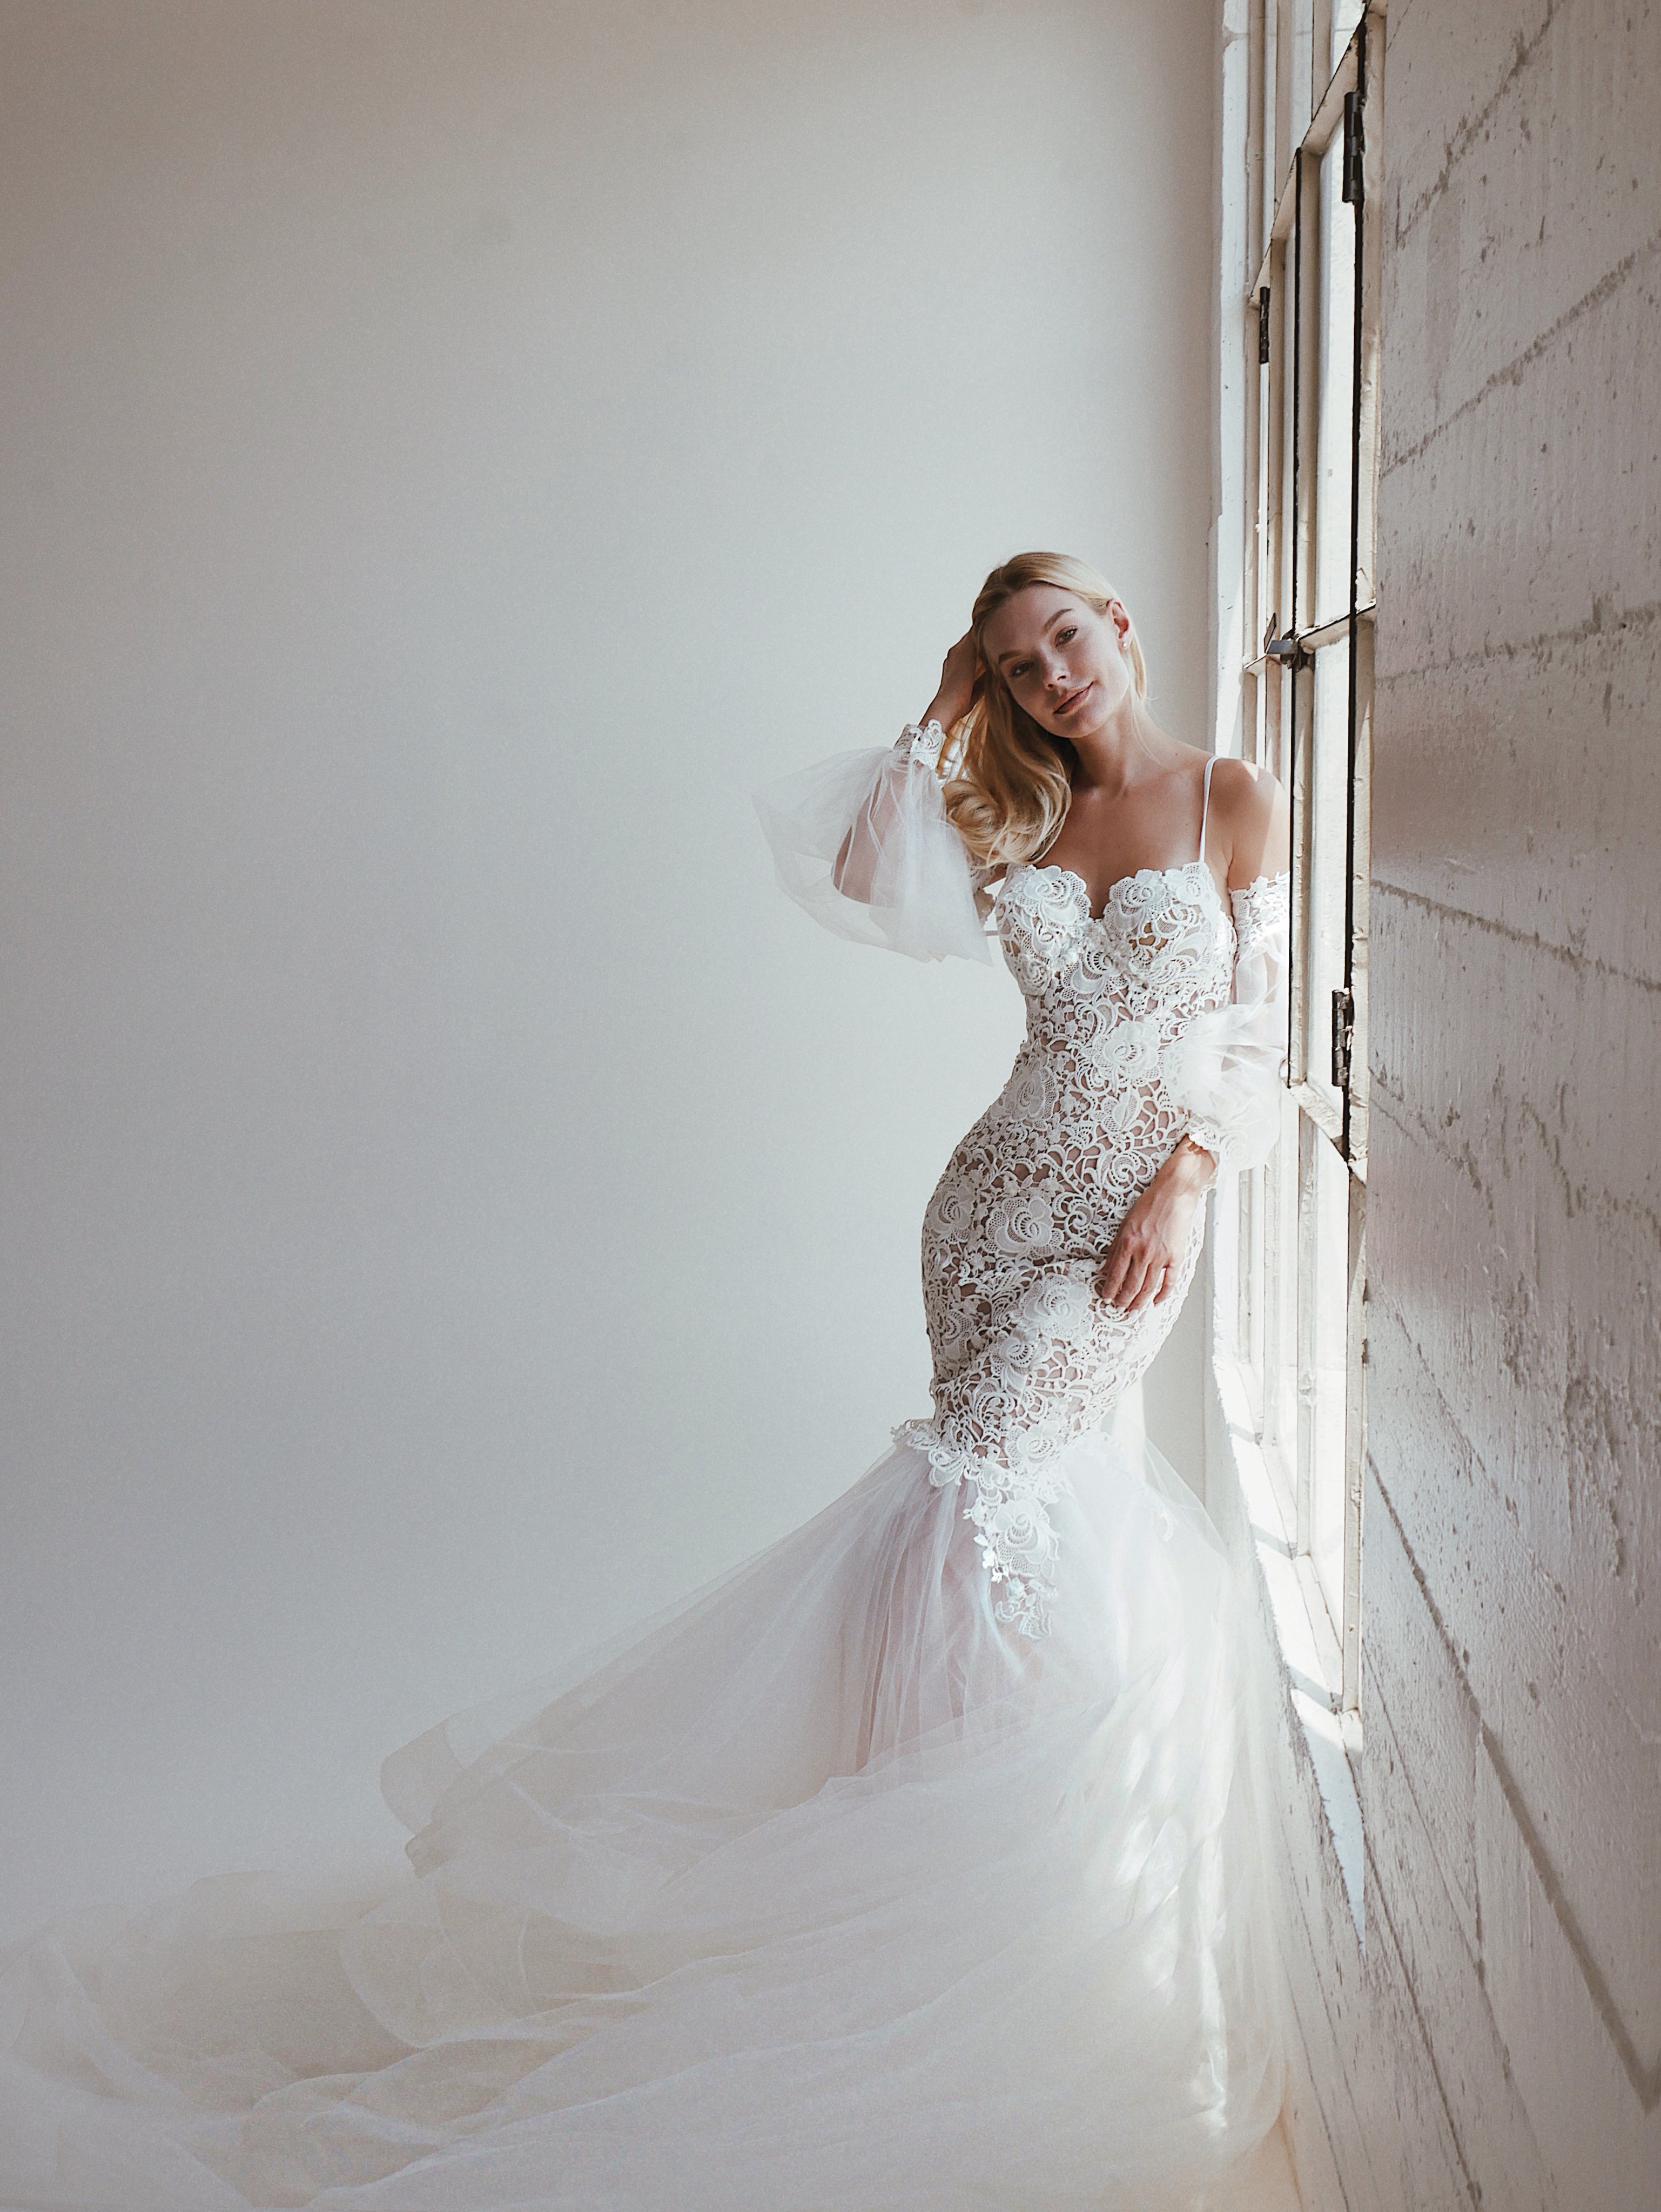 Bohemian lace mermaid wedding dress with detachable sleeves and train by Lauren Elaine Bridal Los Angeles